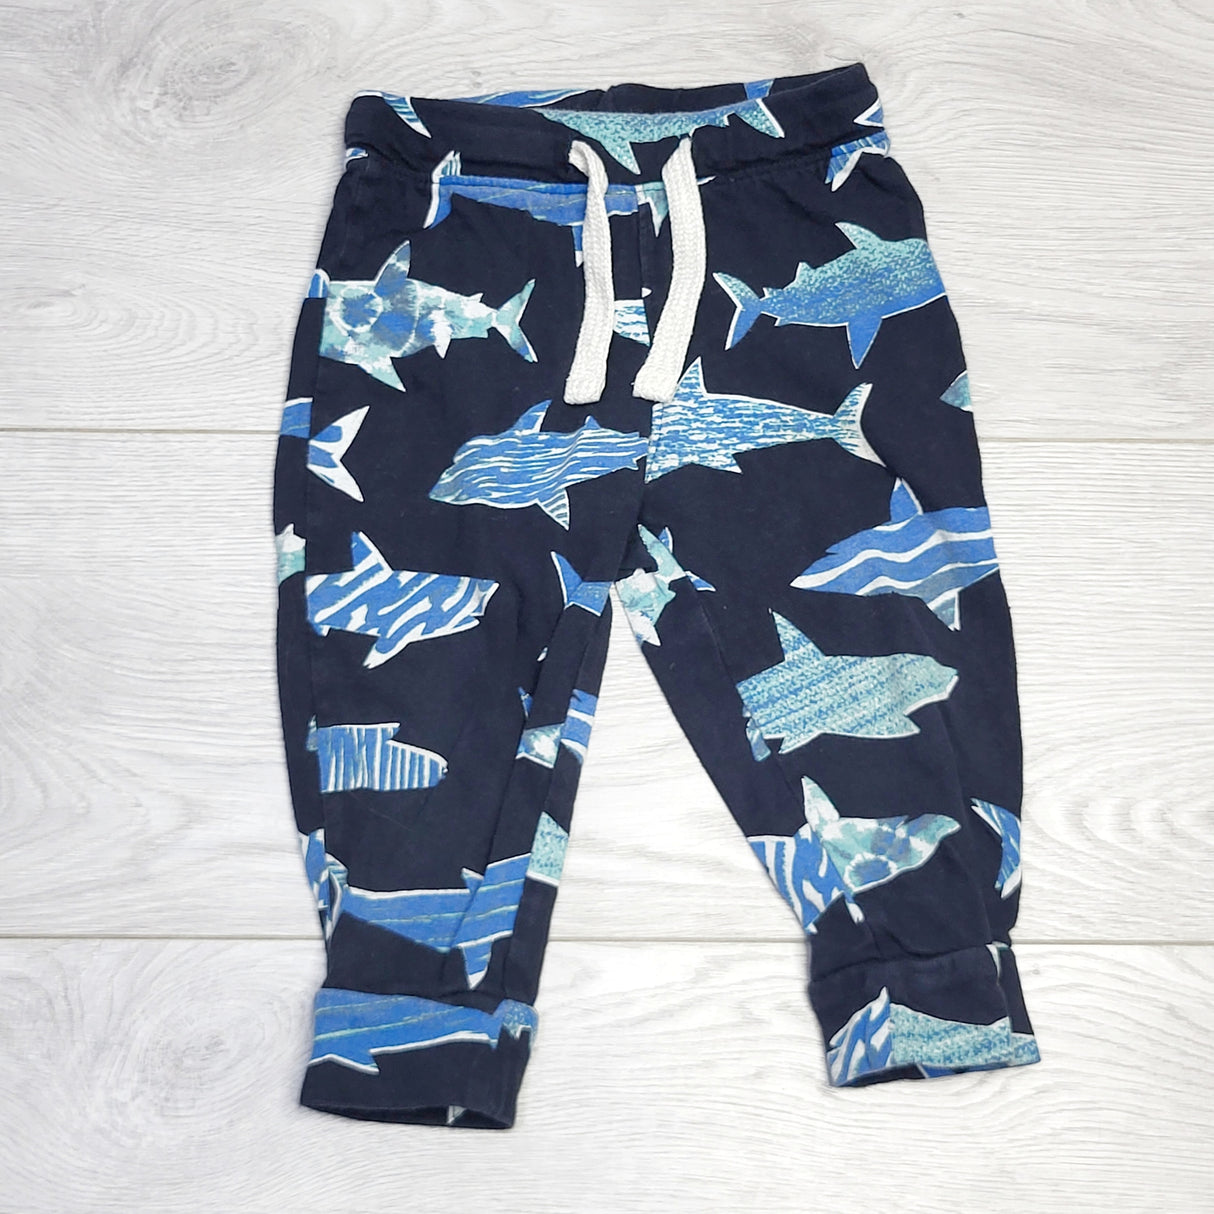 RZA2 - Old Navy navy cotton pants with sharks. Size 12-18 months